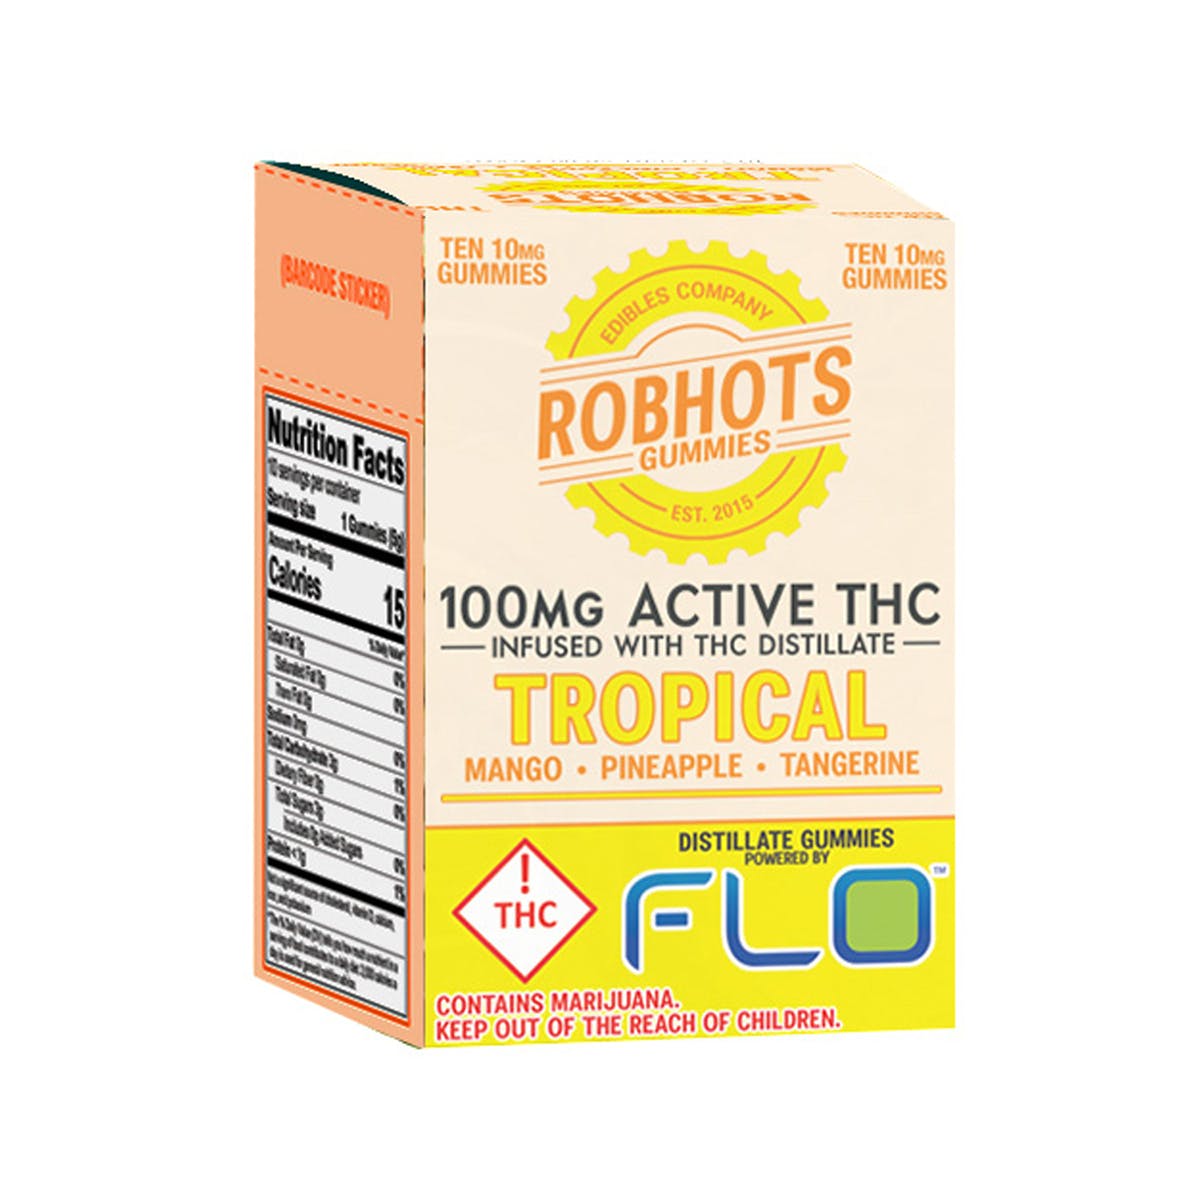 marijuana-dispensaries-high-level-health-dumont-in-downieville-tropical-100mg-robhots-gummy-multipack-rec